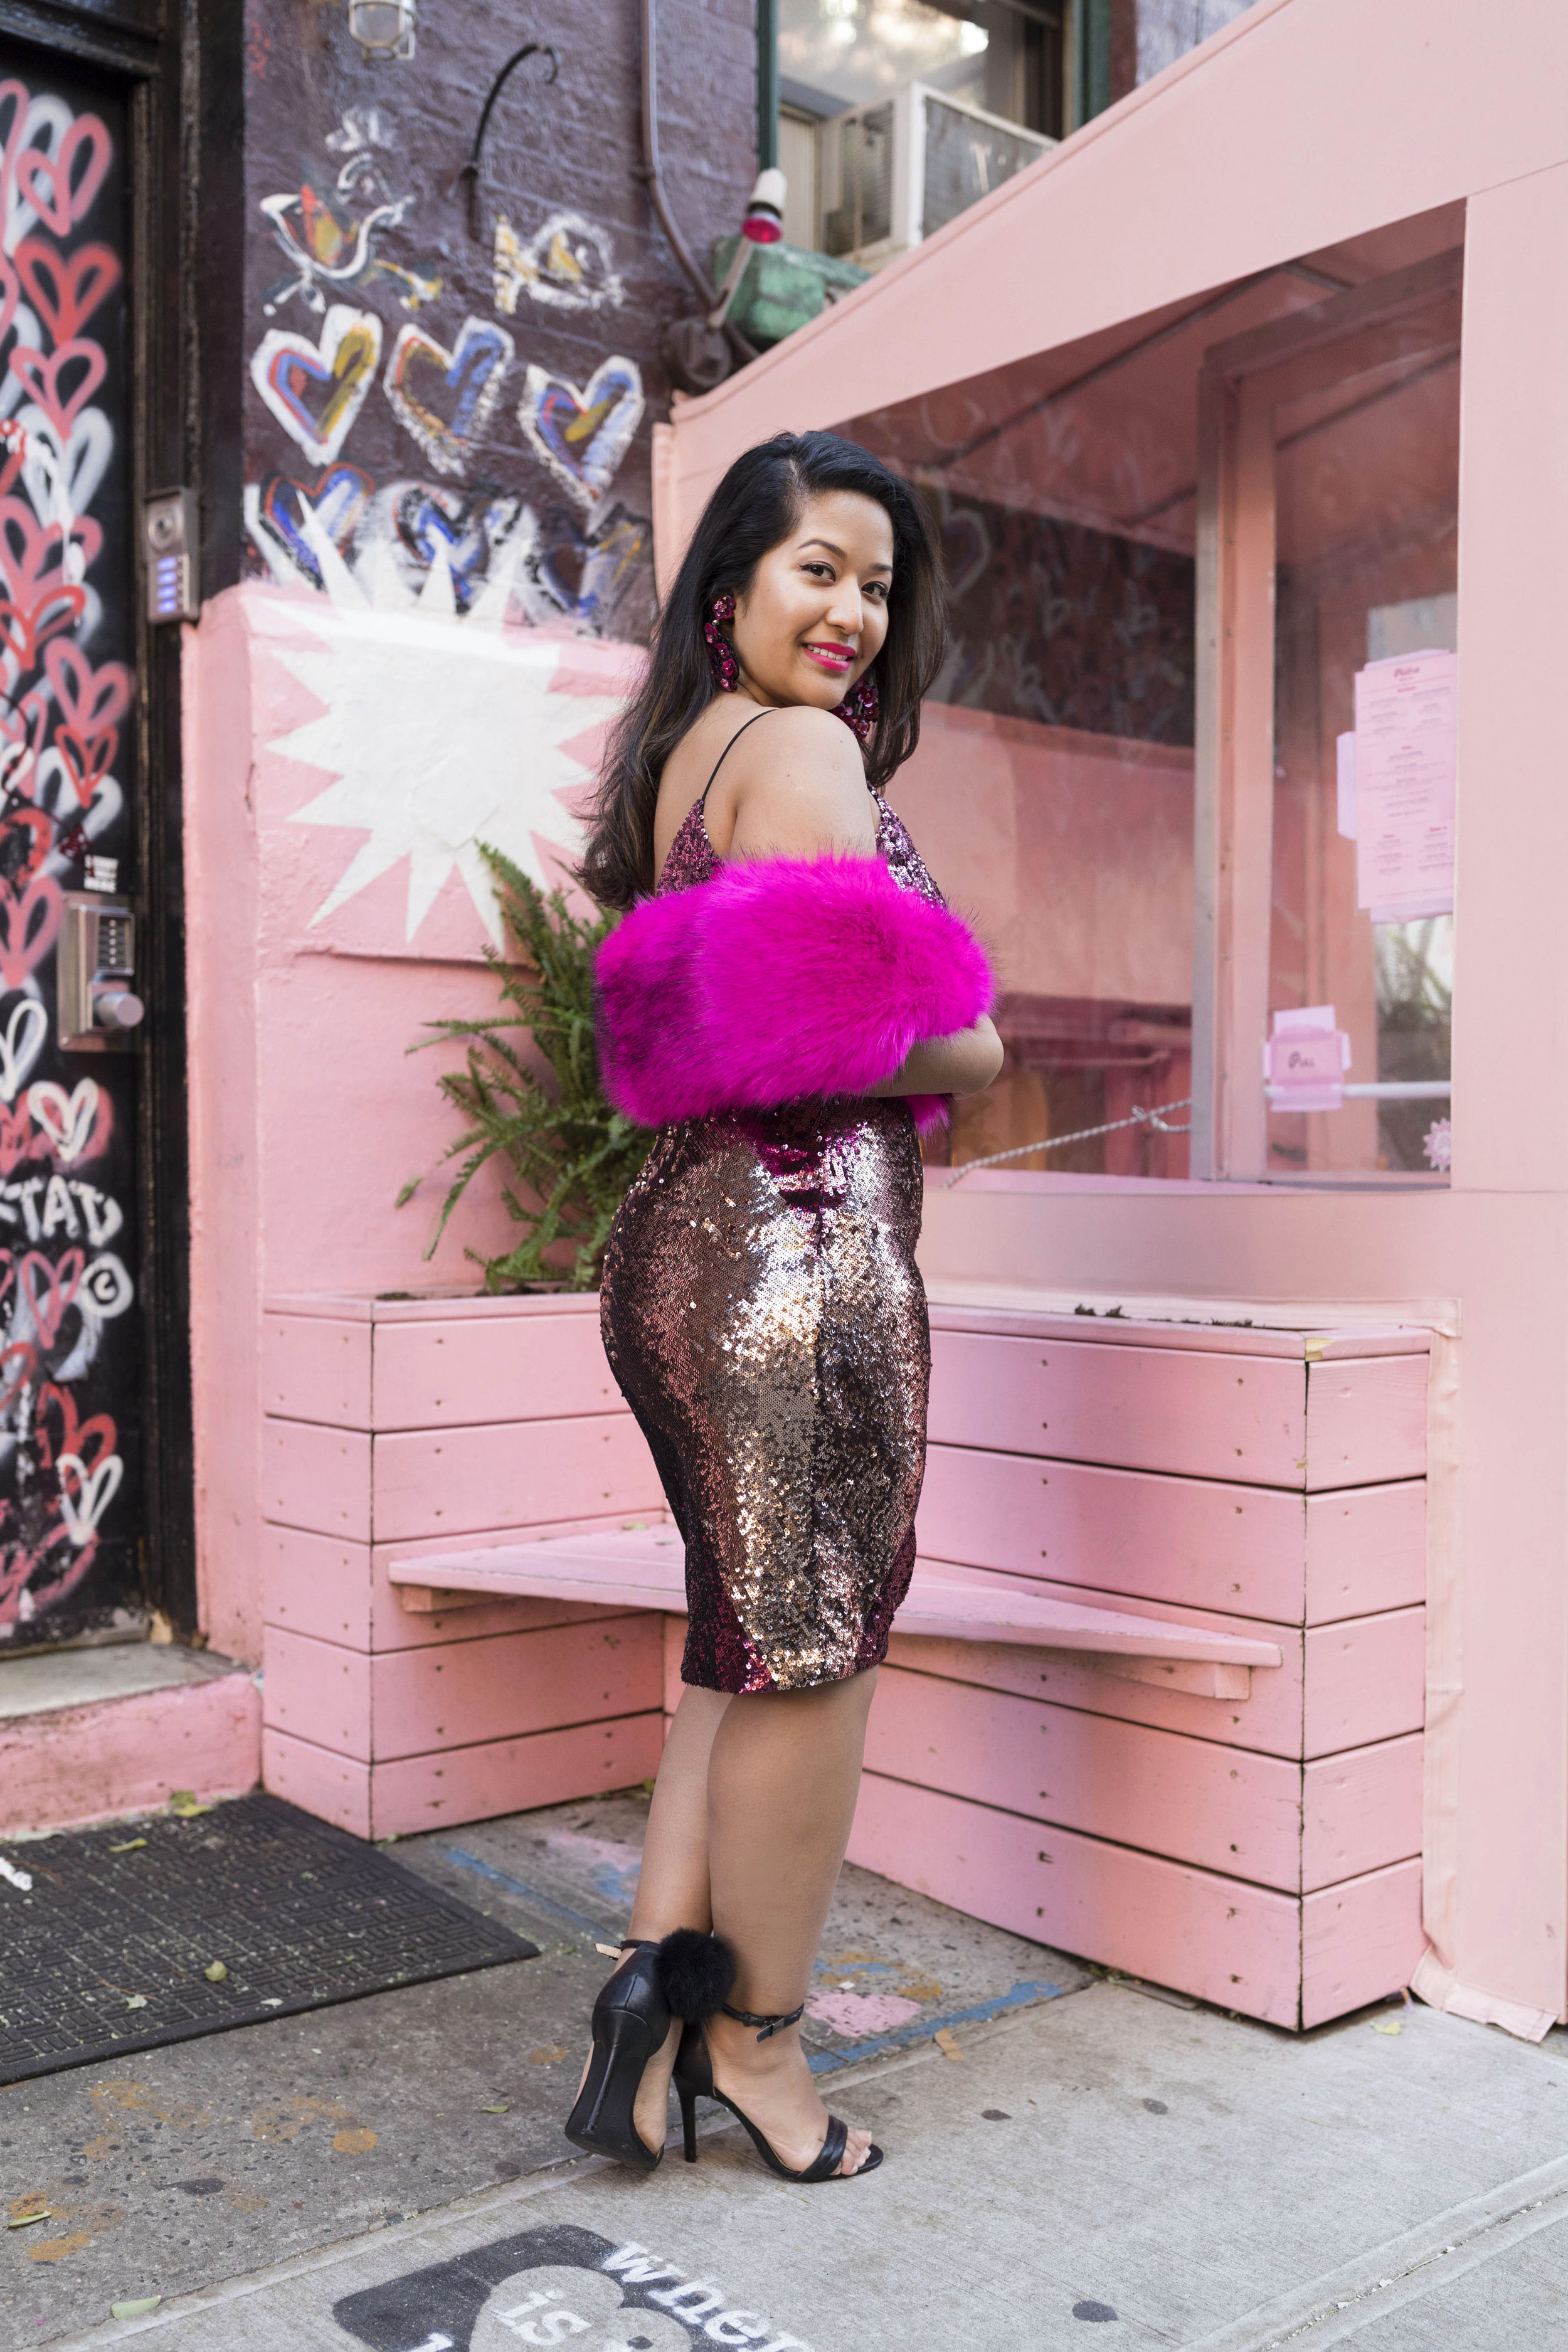 Krity S x New Years Eve Outfit x Aidan Mattox Color Block Pink Sequin Short Dress with Forever 21 Faux Fur Scarf 10.jpg